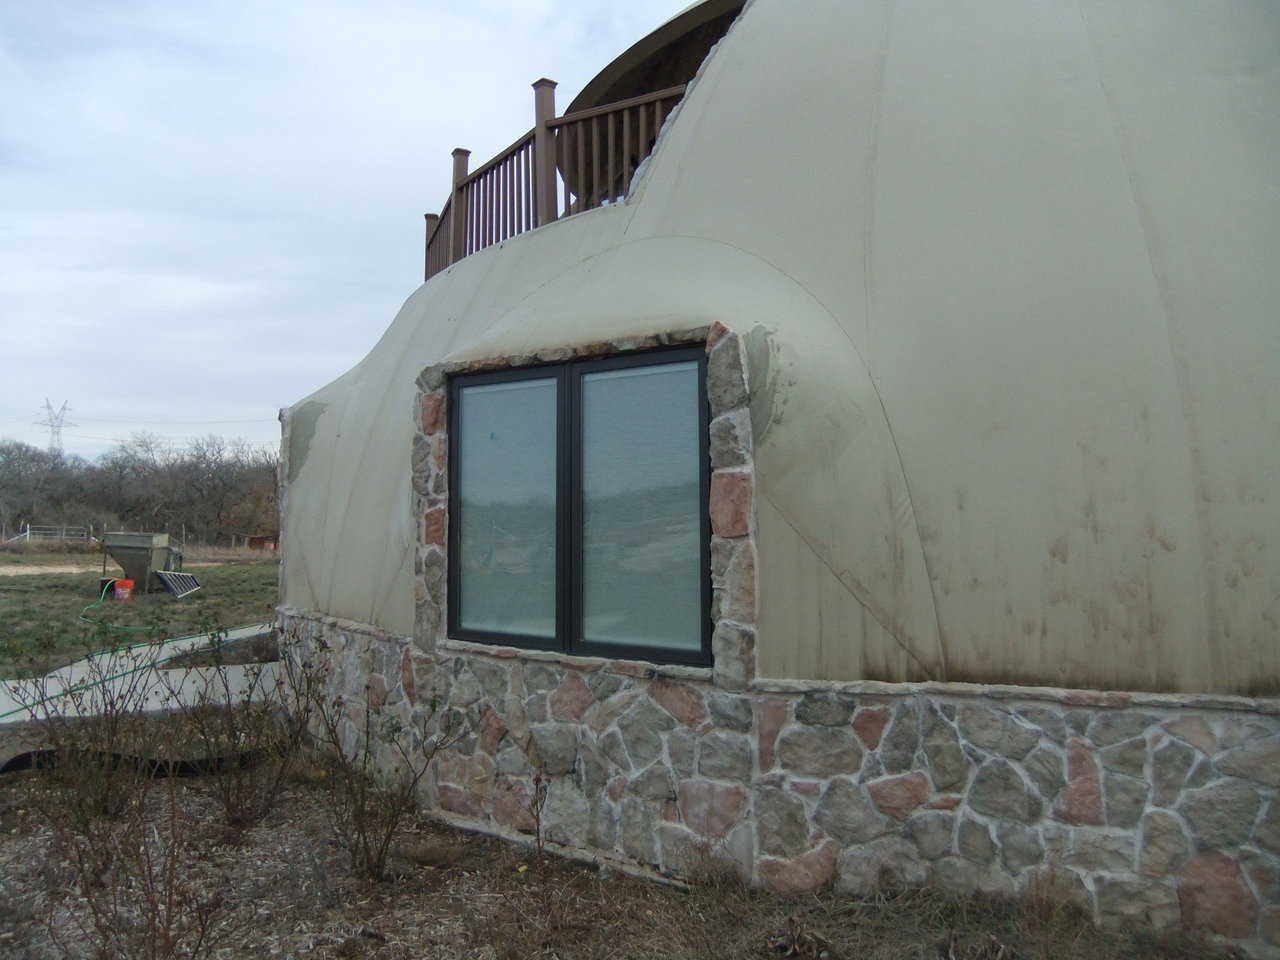 This is the dome as it stood when Monolithic arrived.  The top corners of the windows had wrinkles that we flattened before applying the stucco.